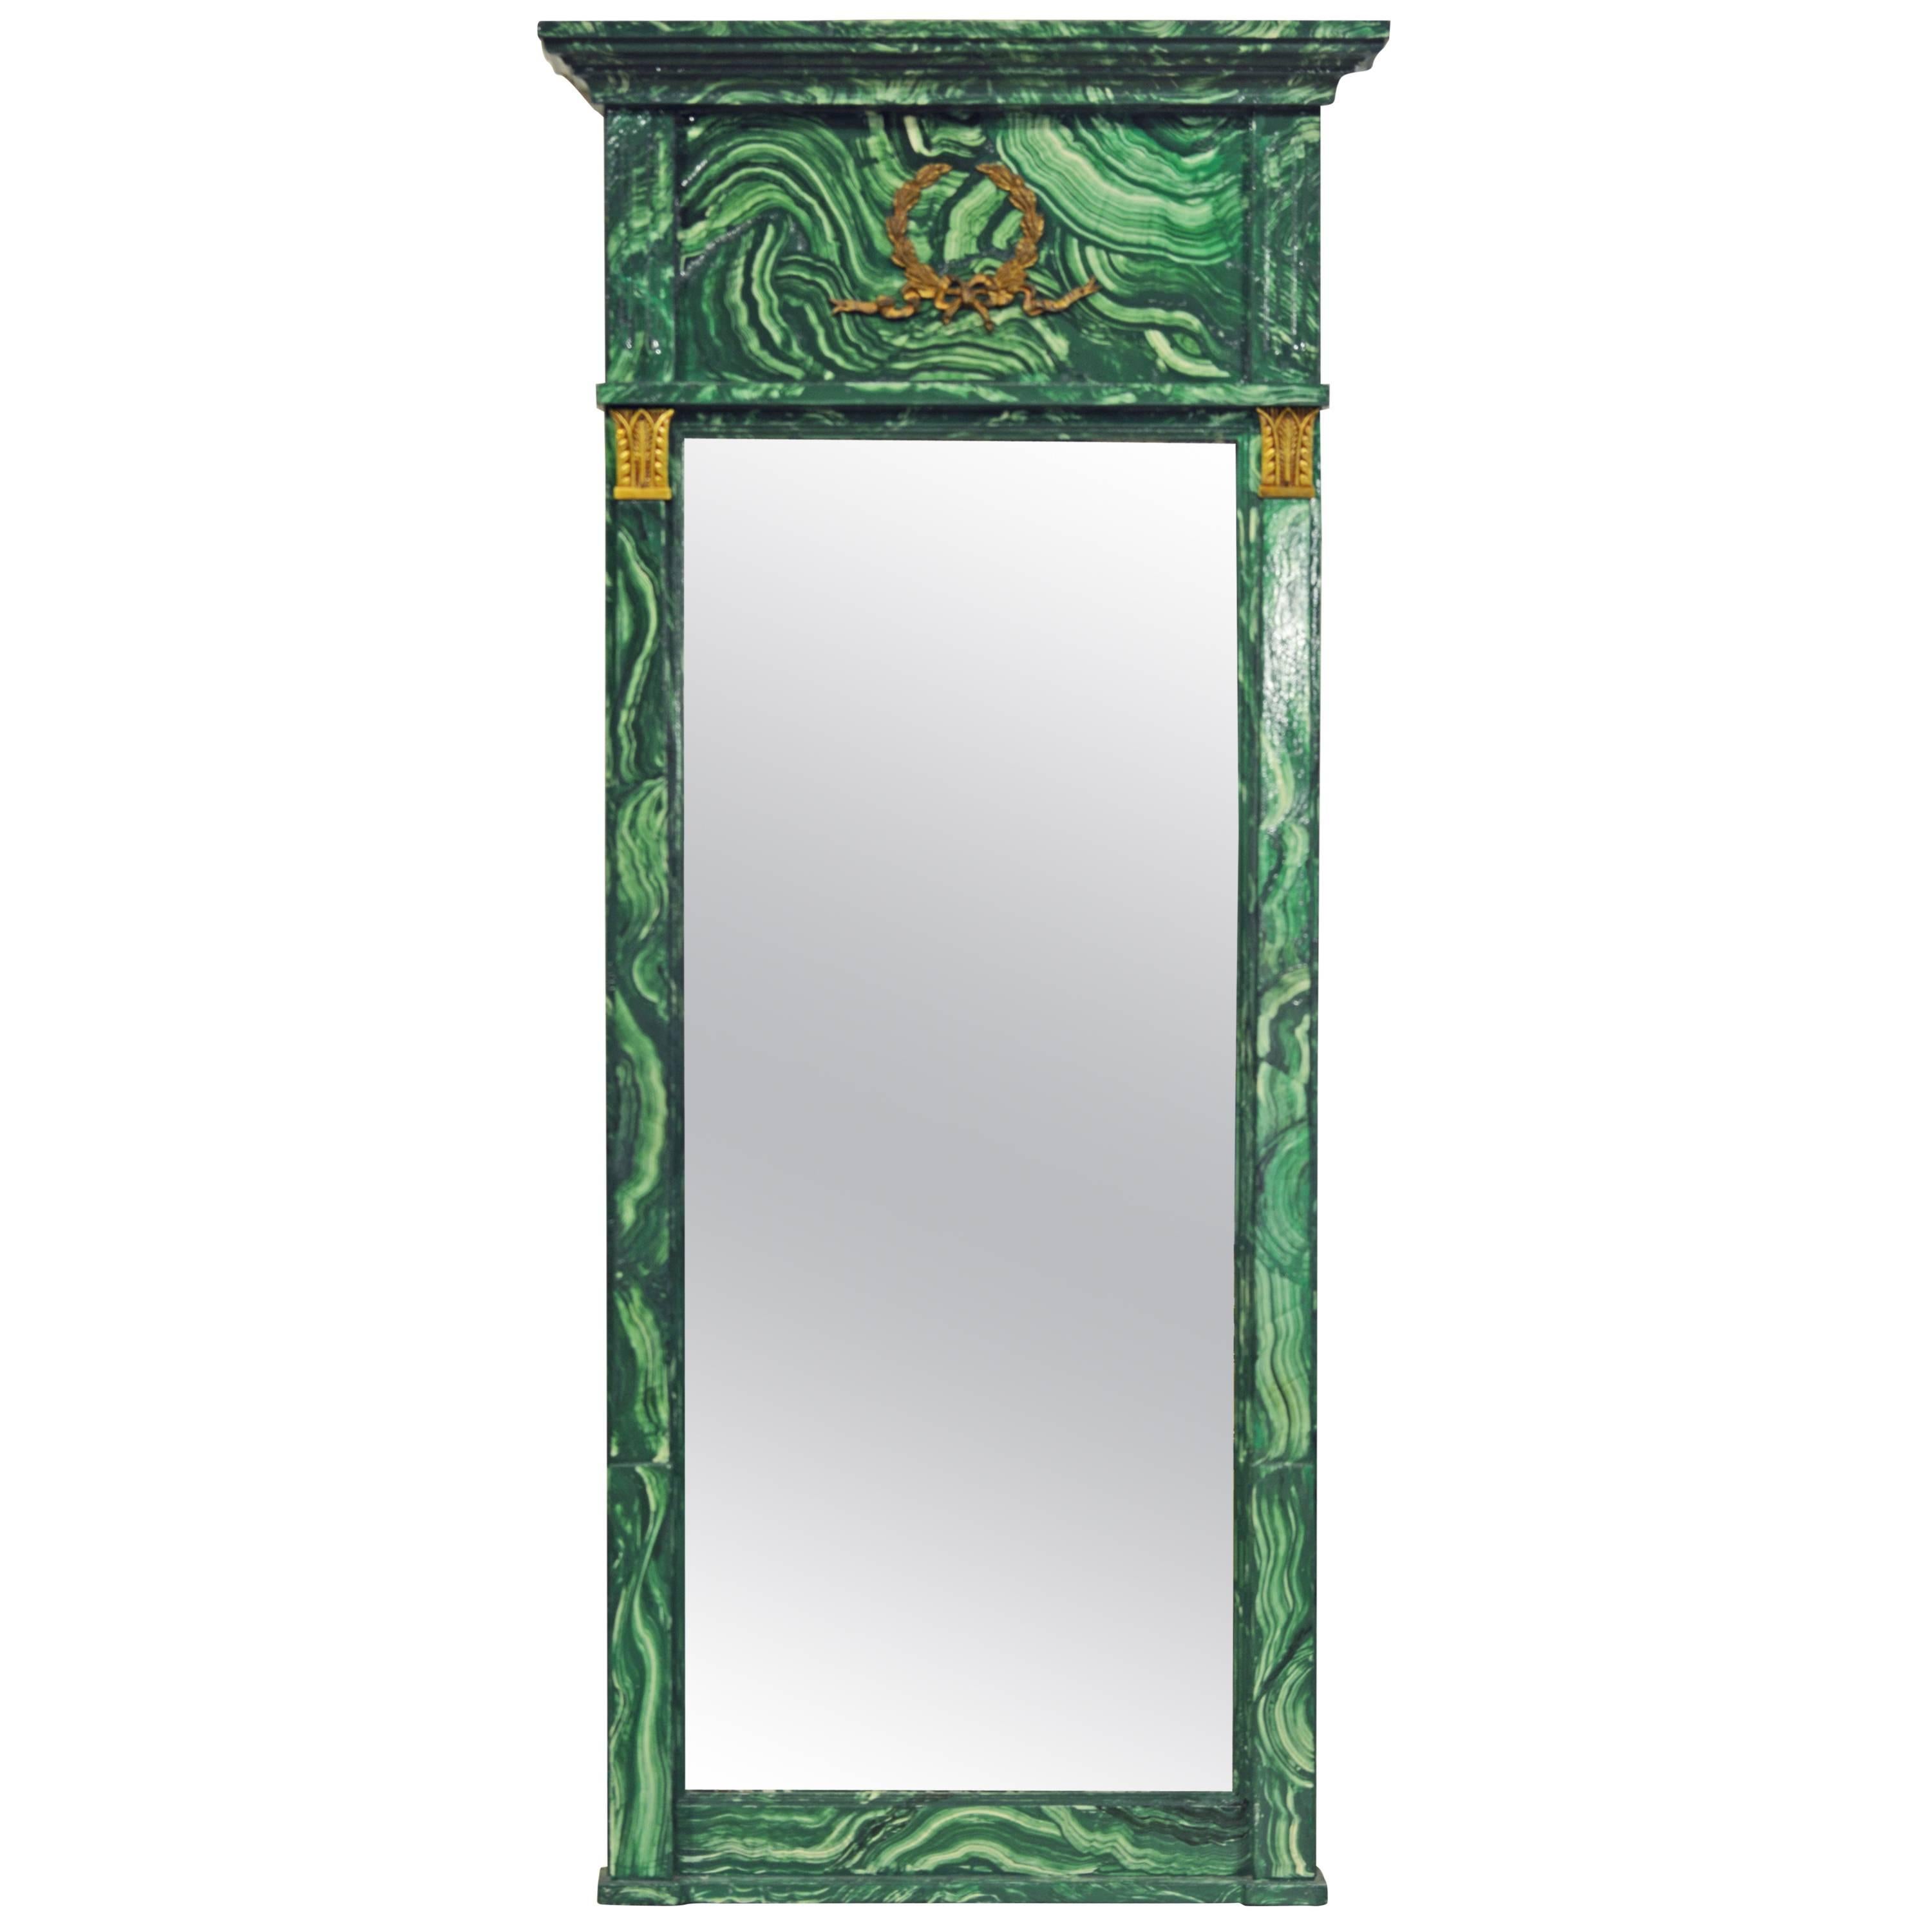 Spectacular French Neoclassical Style Malachite Painted & Bronze Mounted Mirror